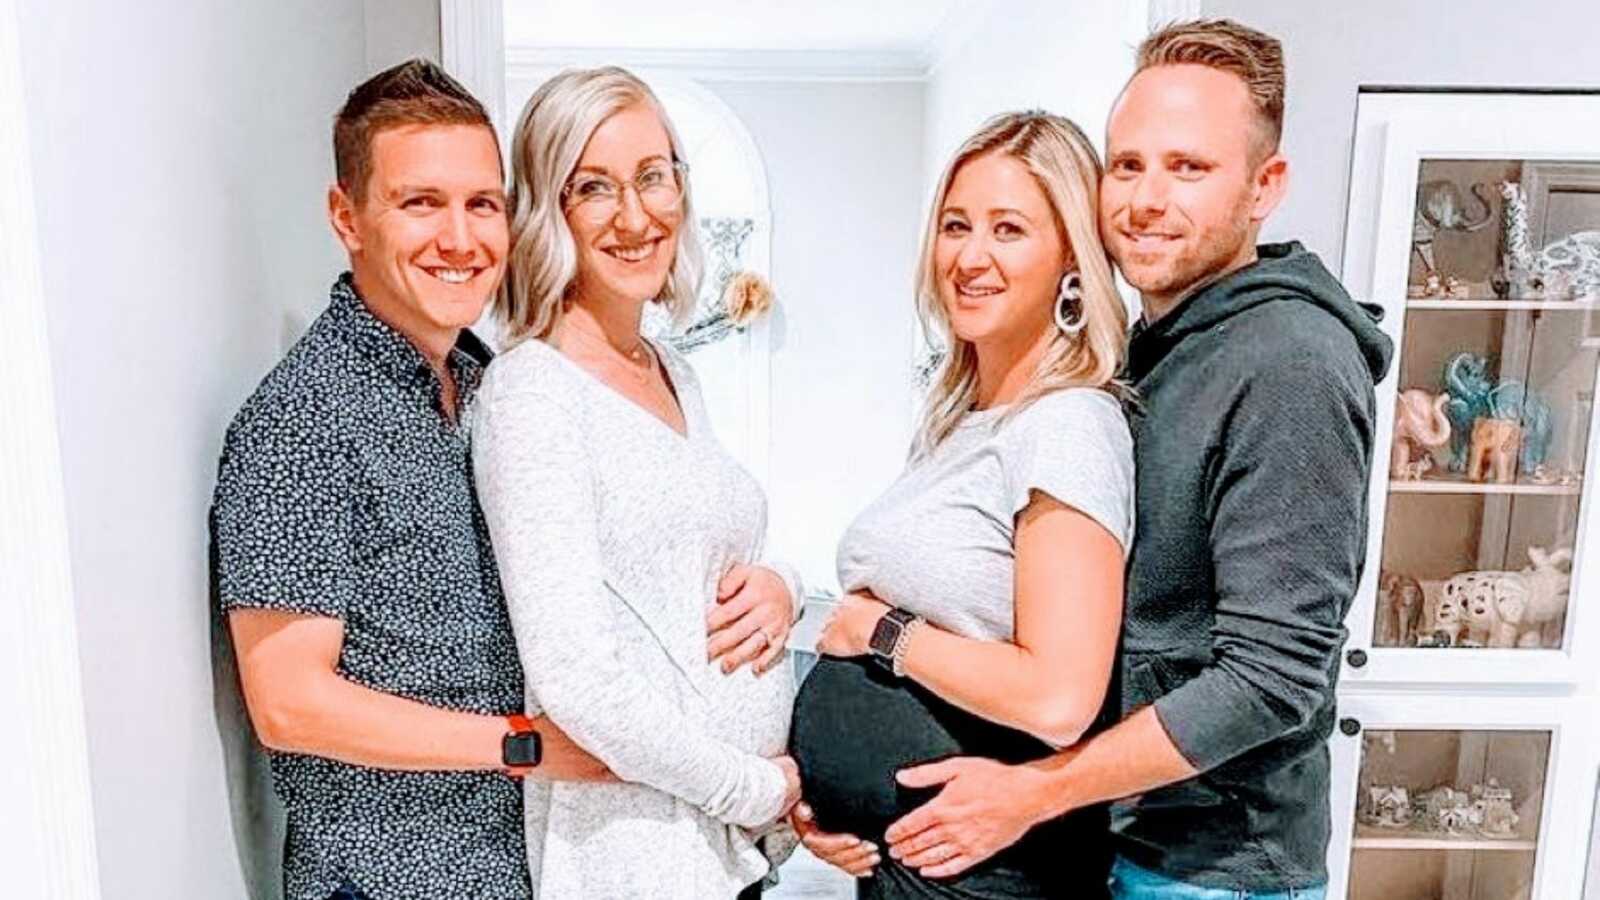 Two sisters pregnant at the same time take pictures with their husbands while showing off their belly bumps